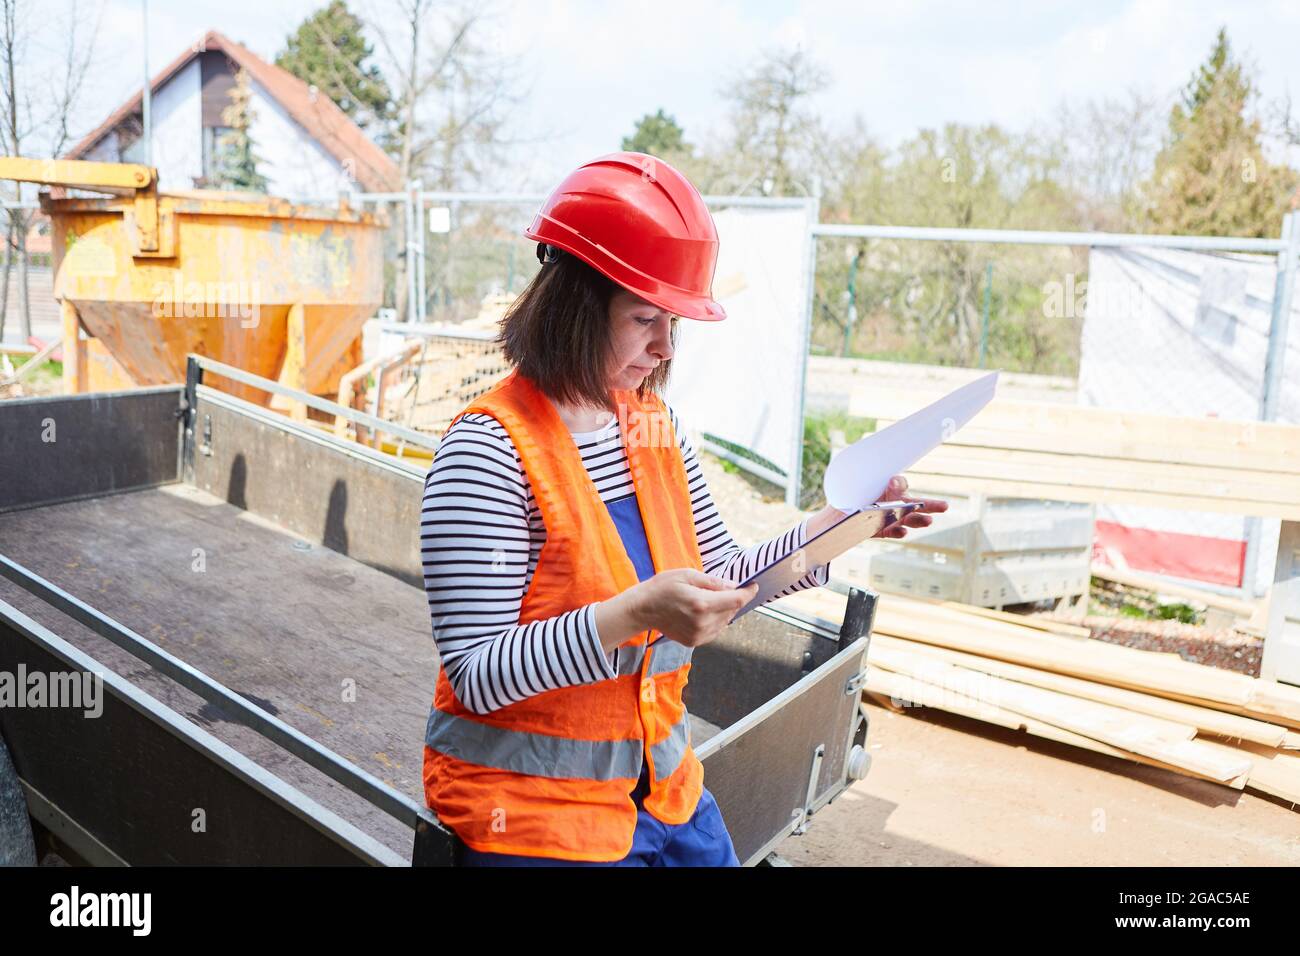 Woman as an architect with protective helmet on a construction site looks at checklist for construction planning Stock Photo